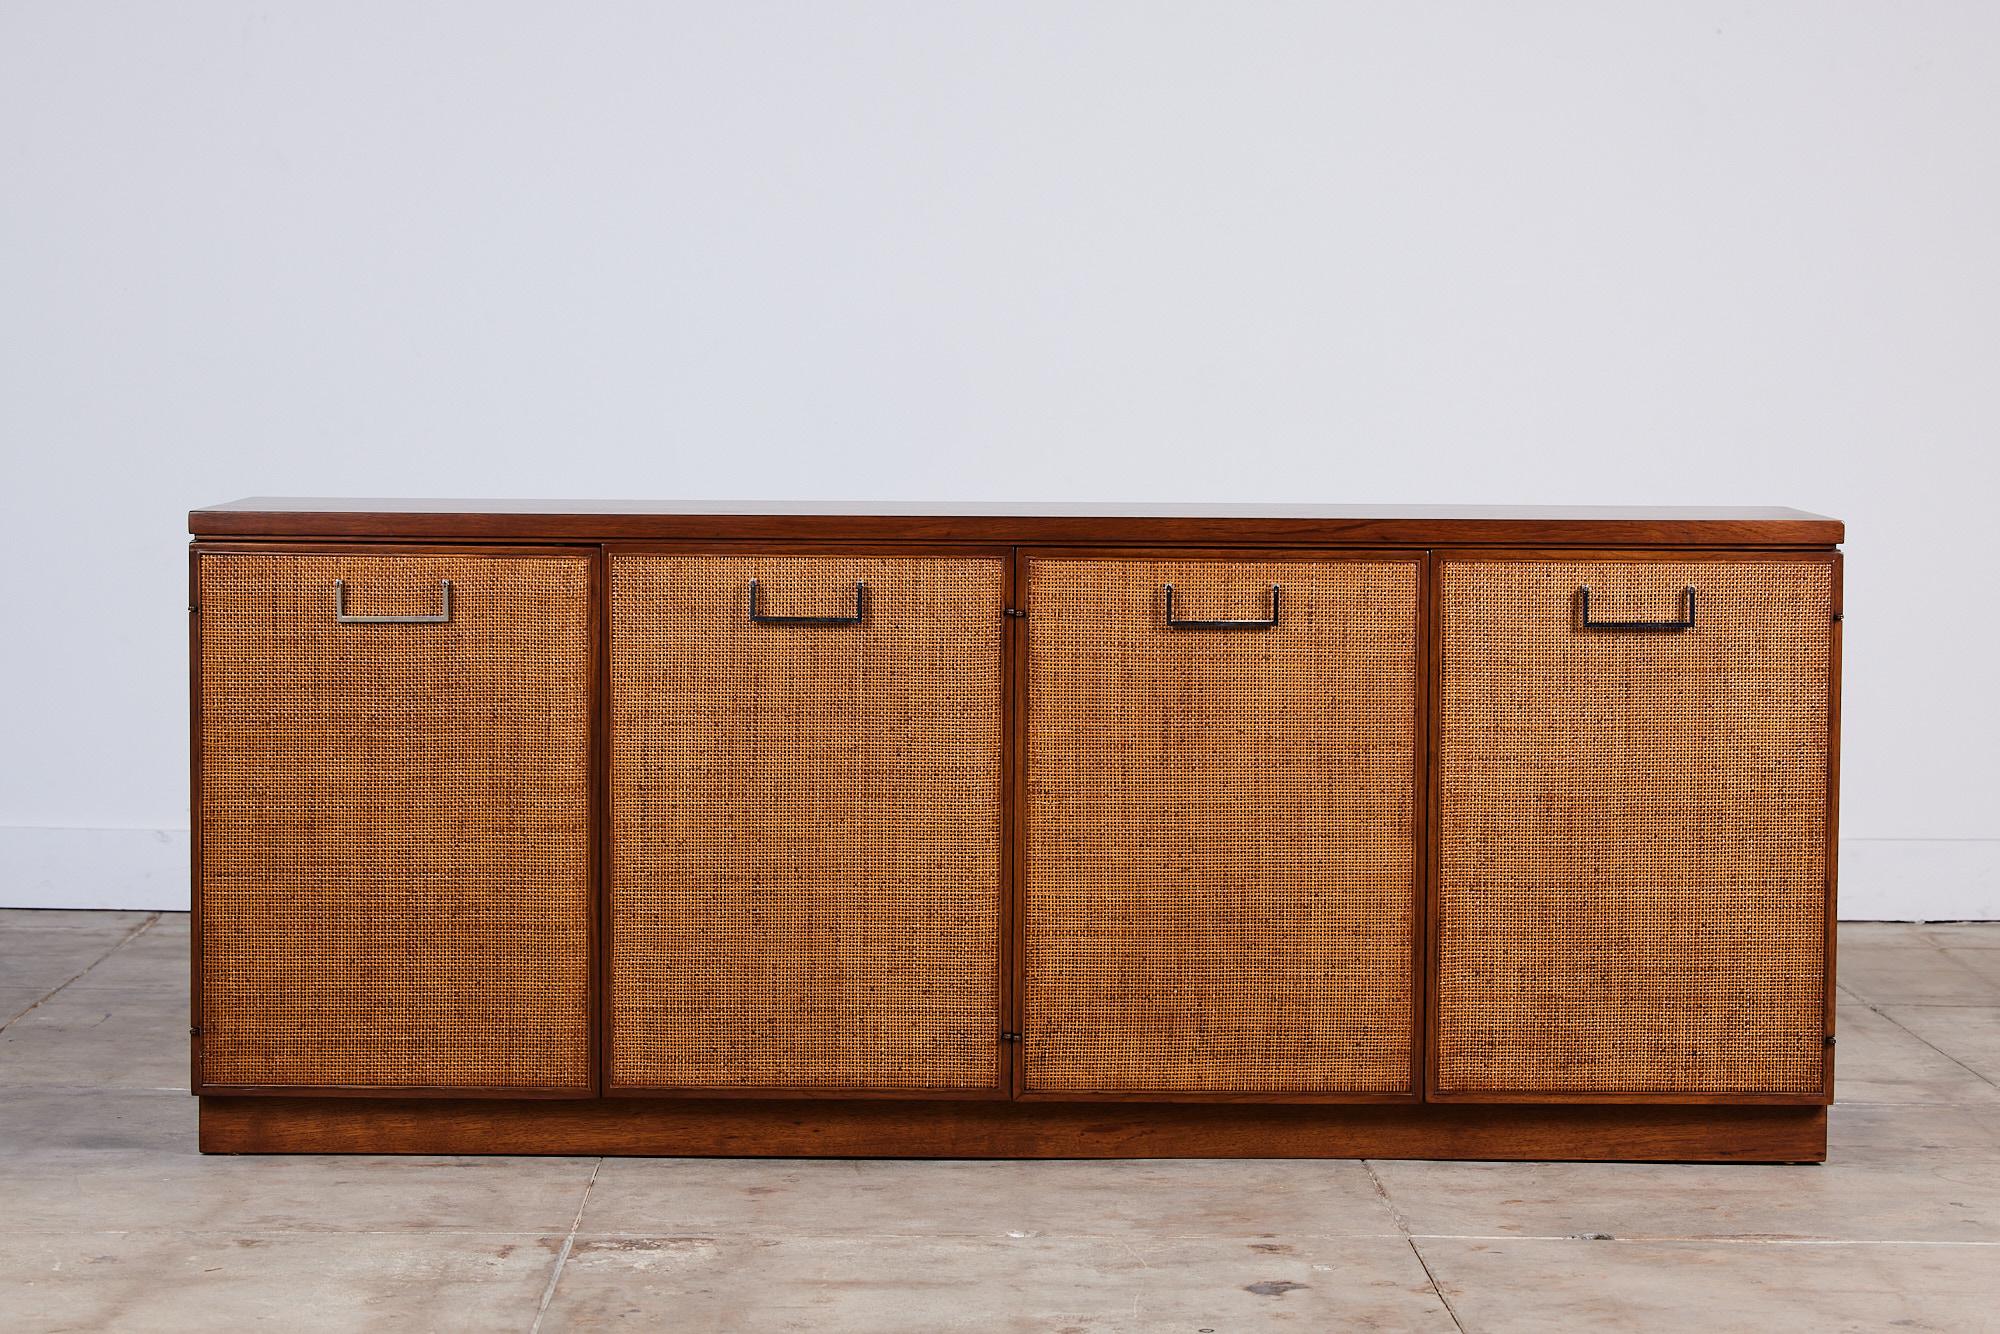 Founders four door walnut cane front credenza, c.1970s, USA. This piece features four beautiful cane front door panels and angular chrome door pulls. The interior allows for ample storage with two drawers along the top of the credenza and four